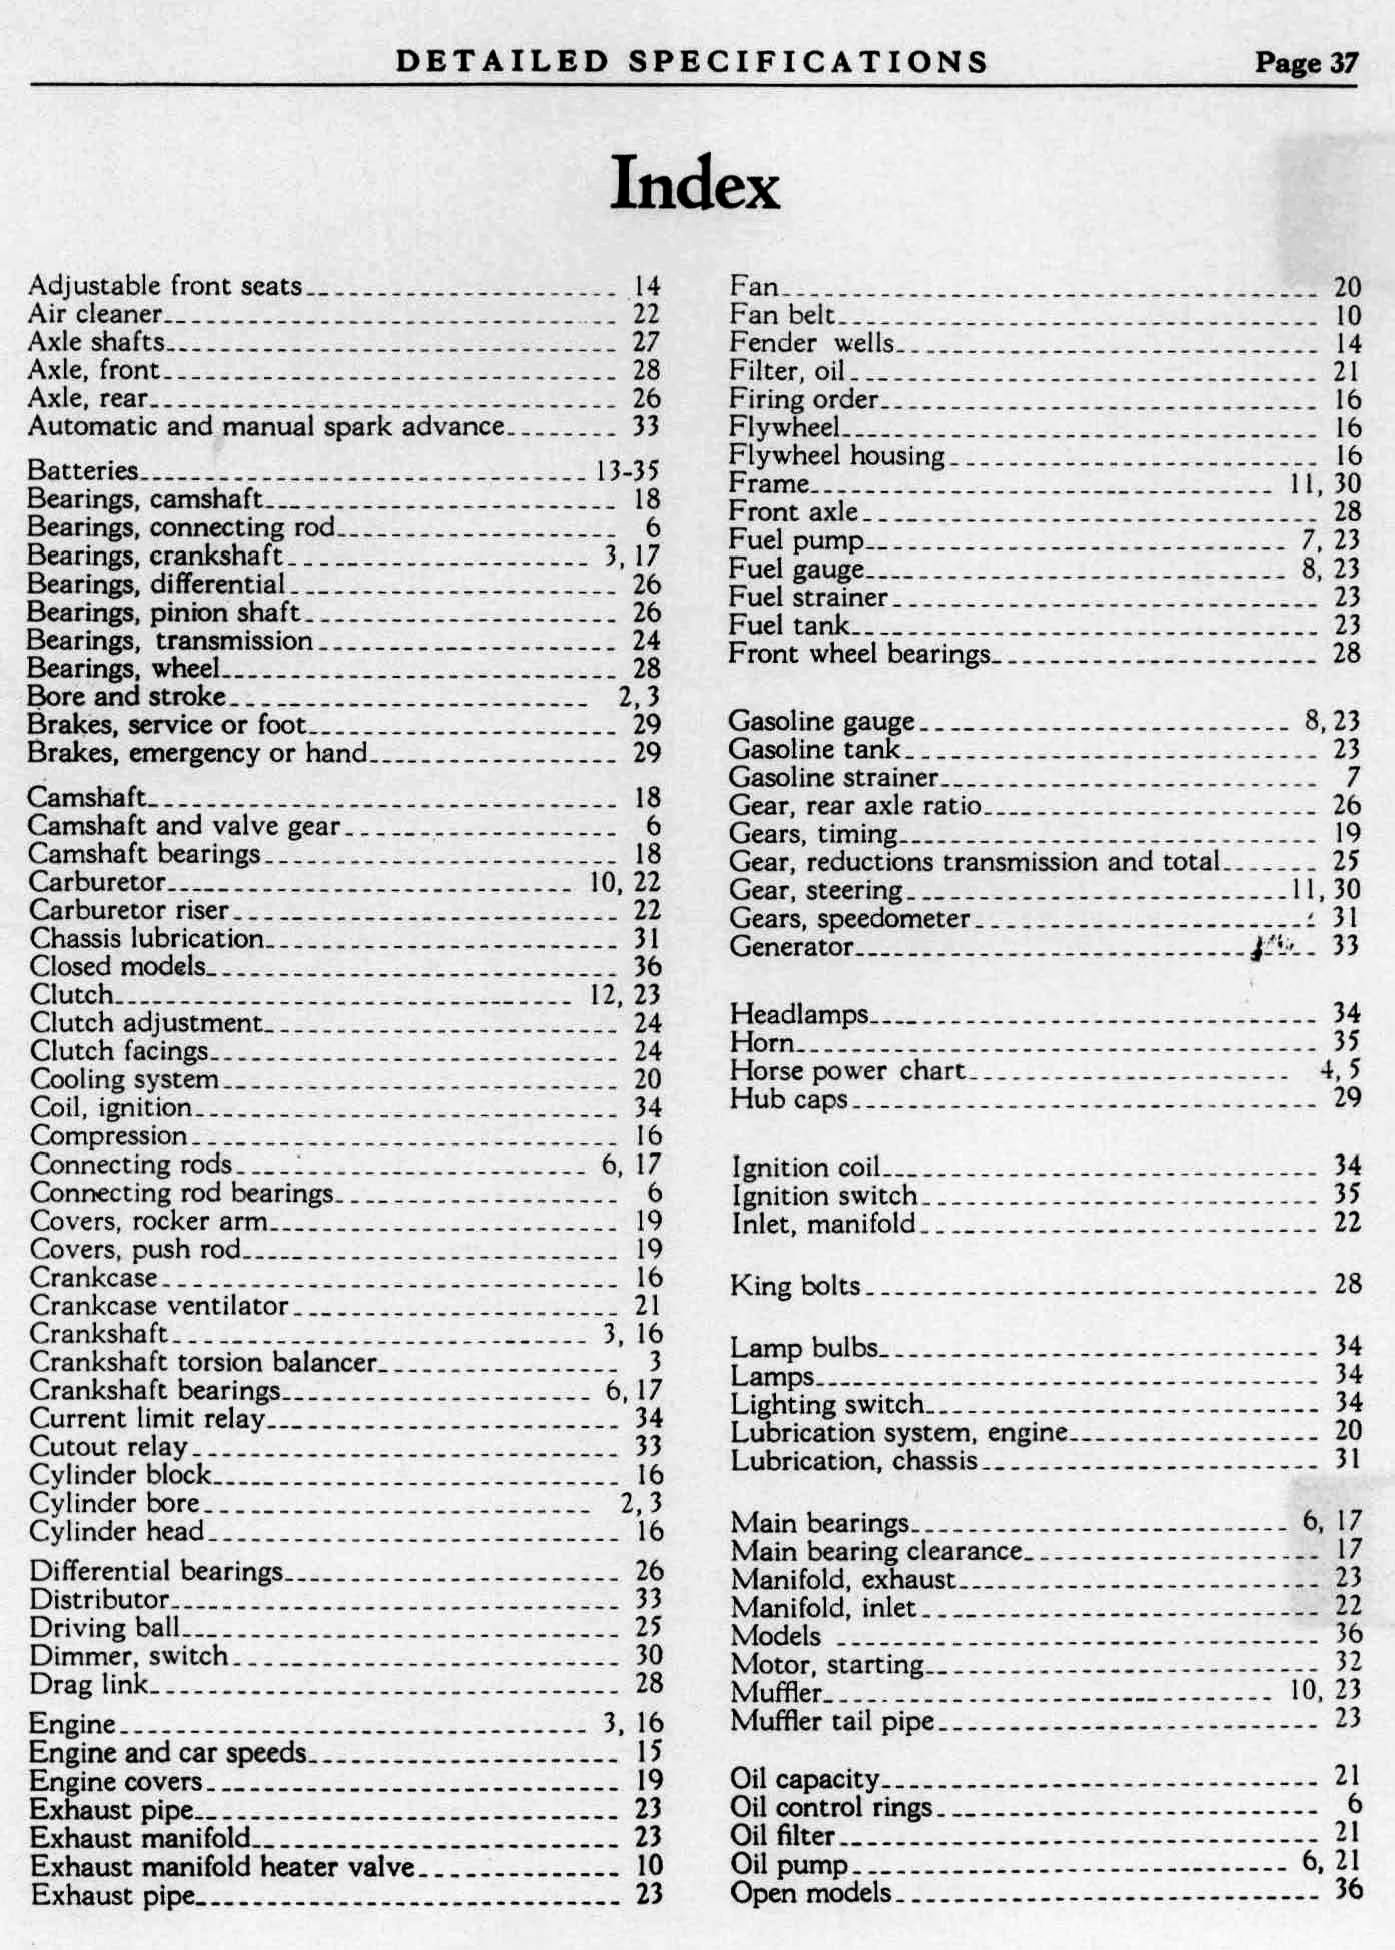 1929 Buick Detailed Specs-37